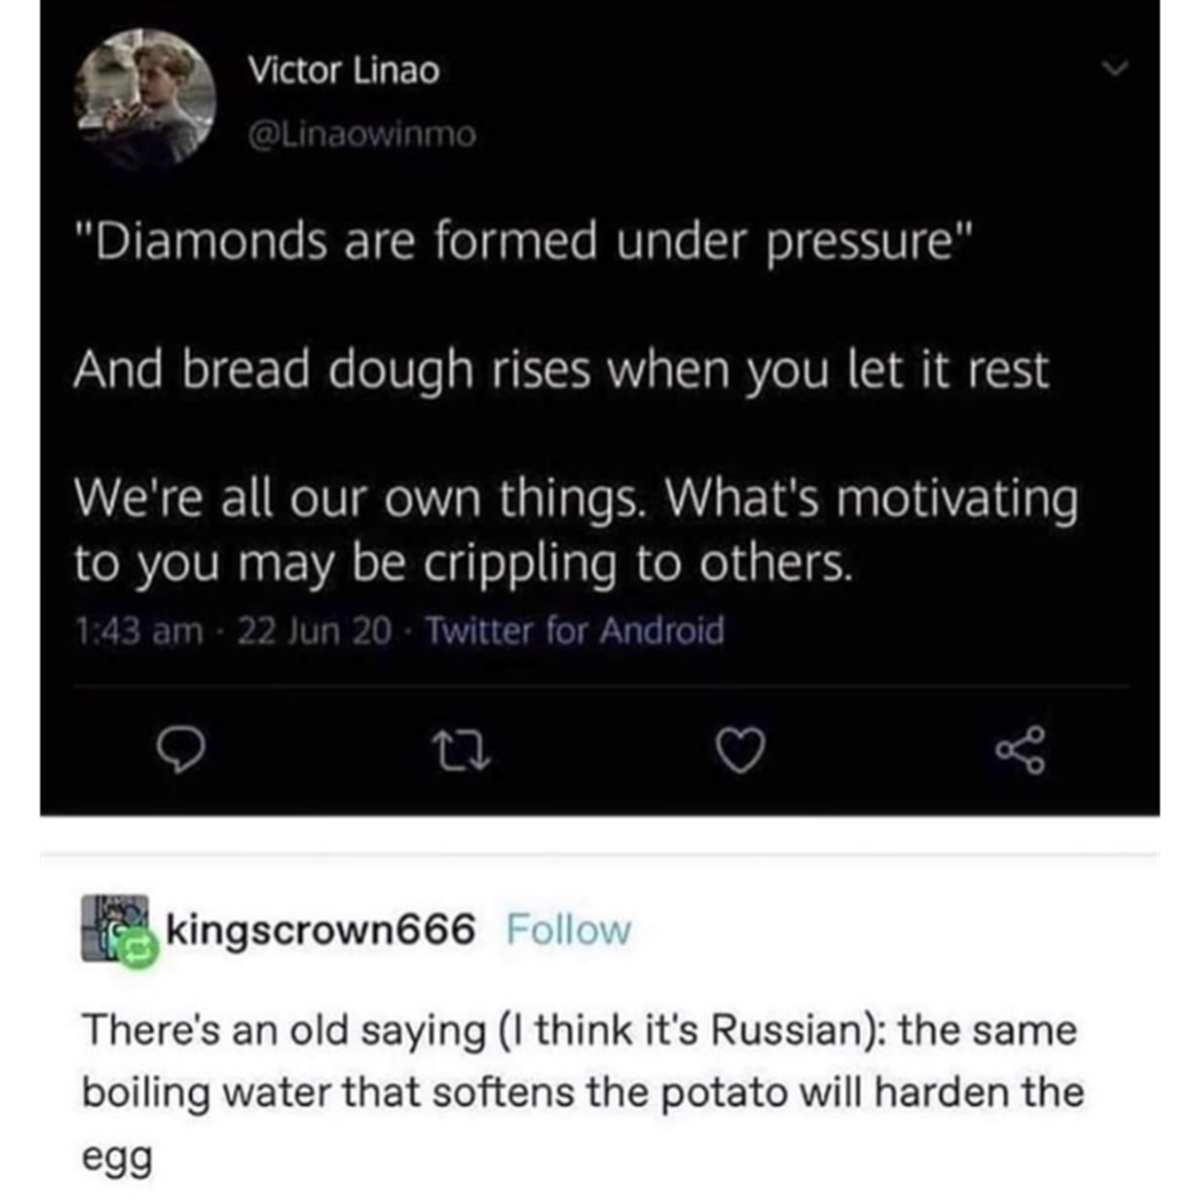 screenshot - Victor Linao "Diamonds are formed under pressure" And bread dough rises when you let it rest We're all our own things. What's motivating to you may be crippling to others. 22 Jun 20 Twitter for Android kingscrown666 There's an old saying I th